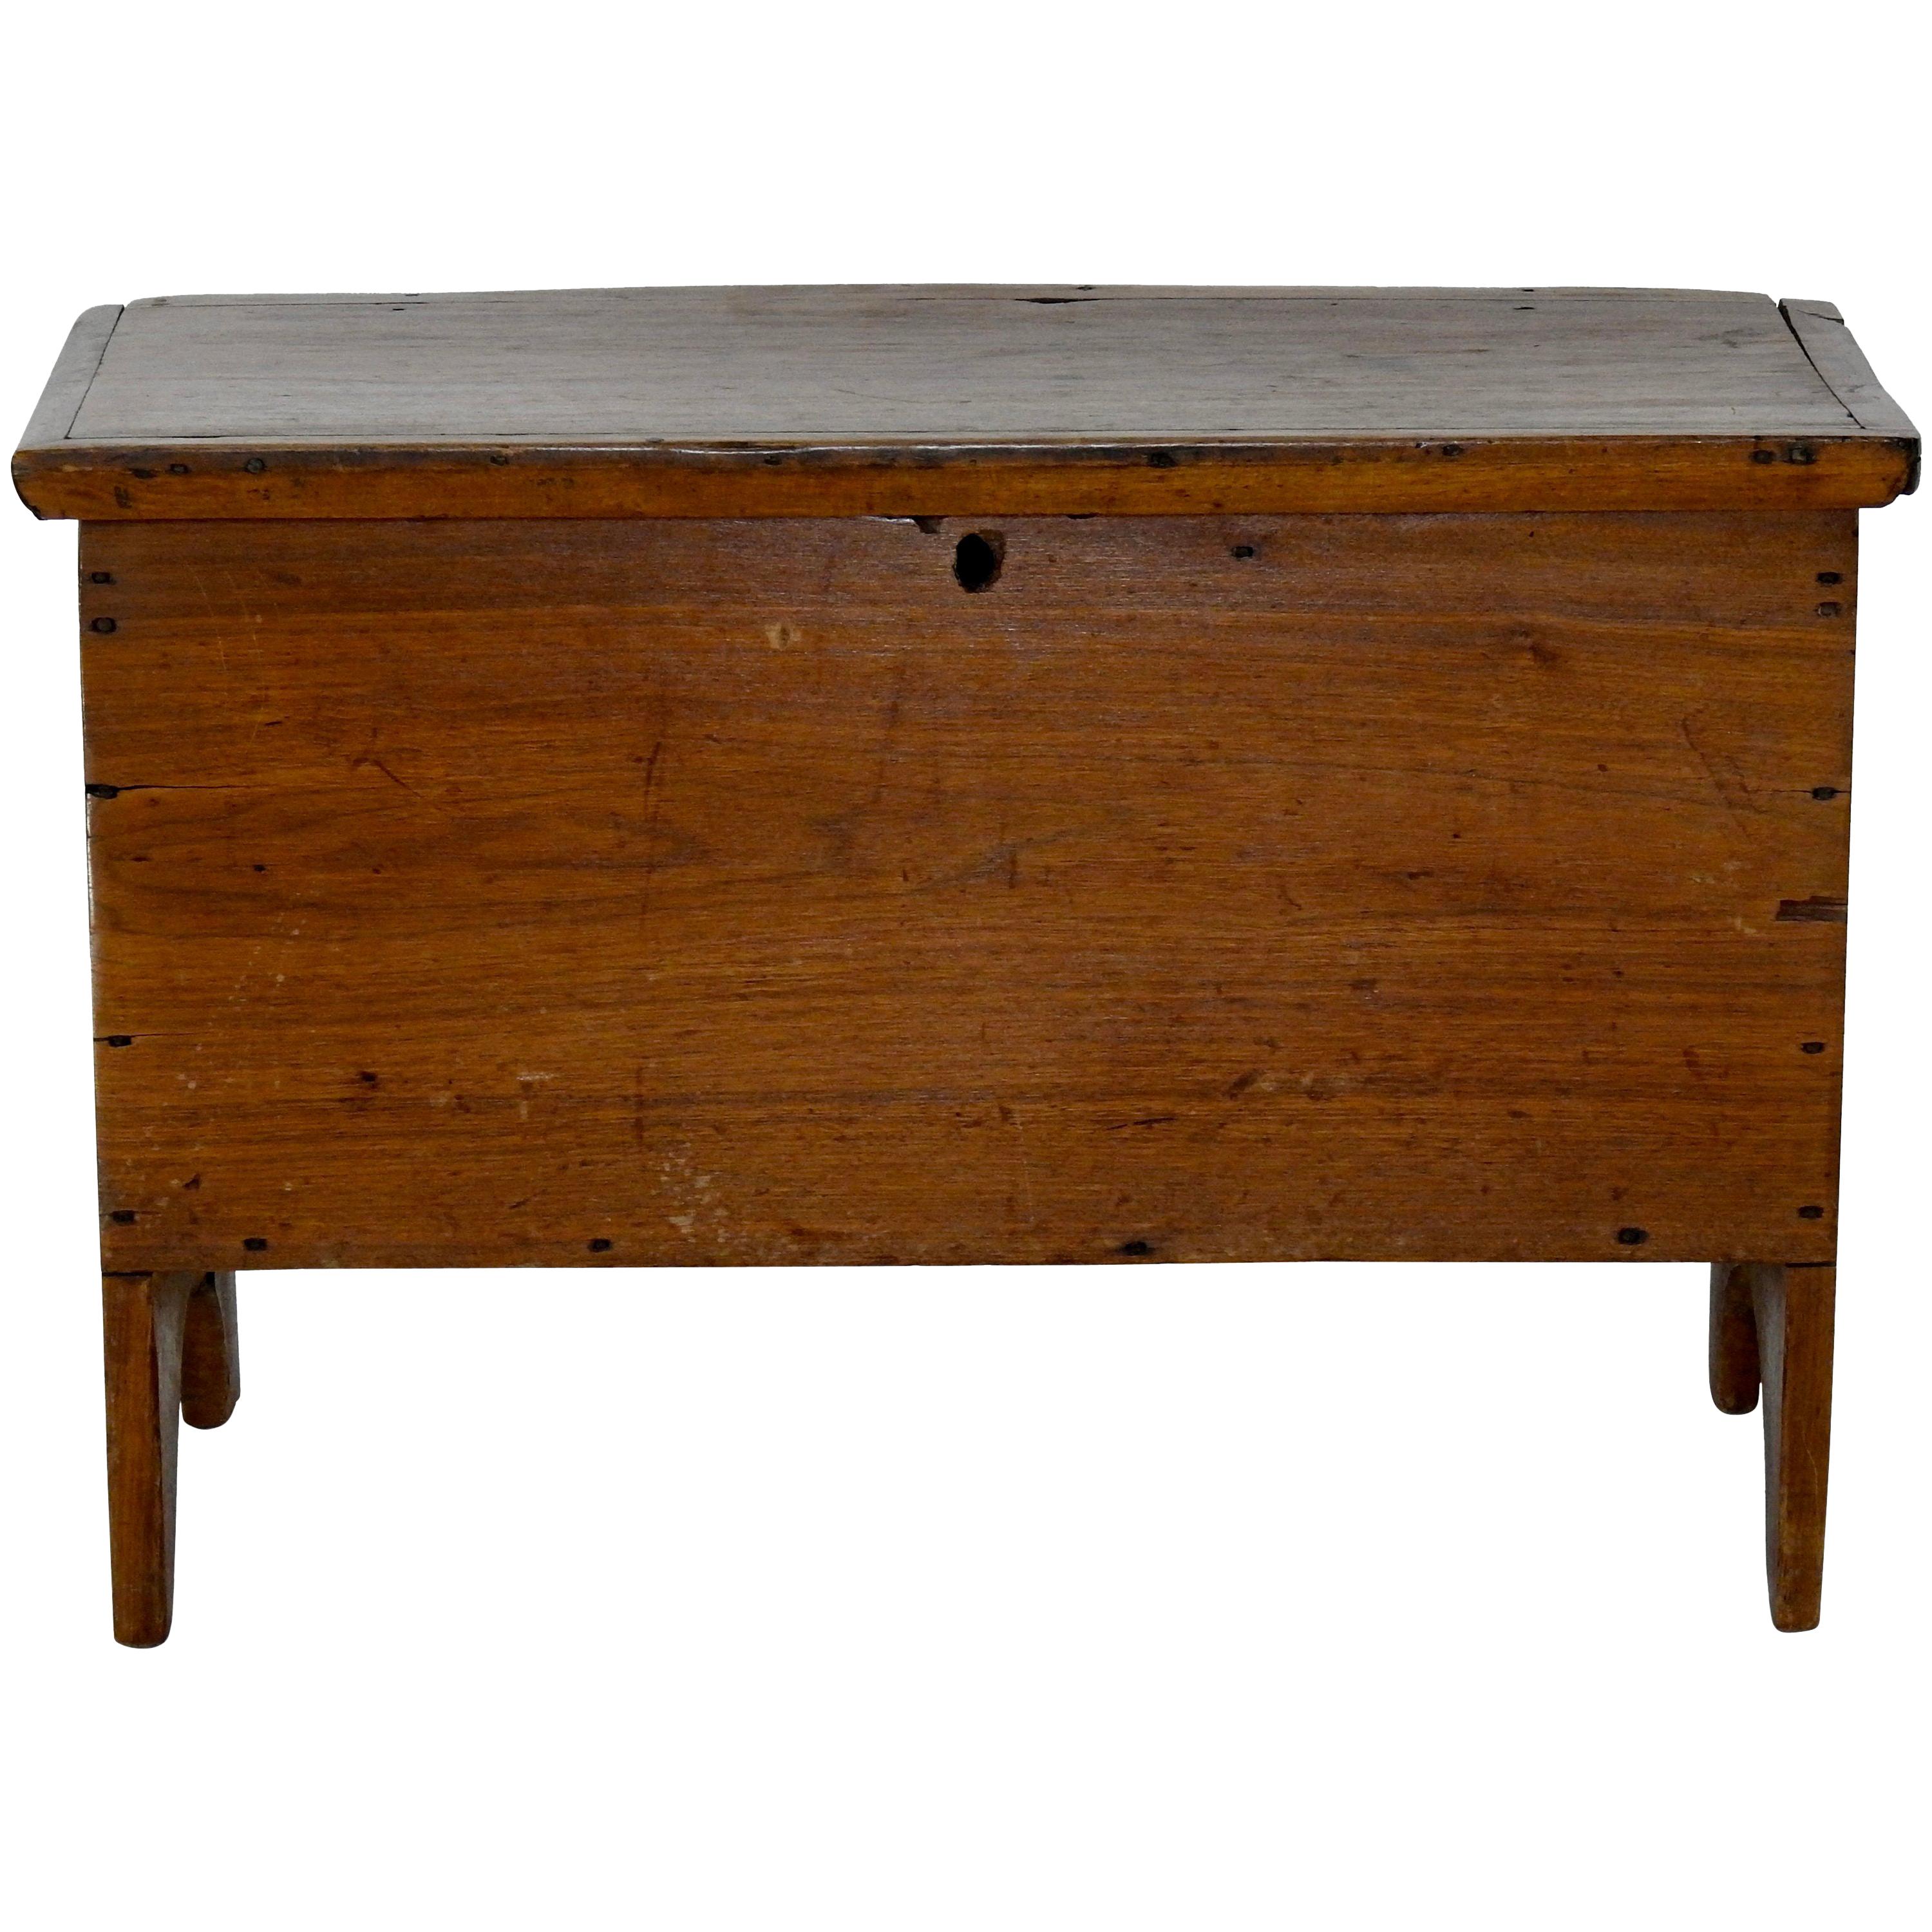 Walnut Sugar Chest with Lift Top, Early 19th Century For Sale